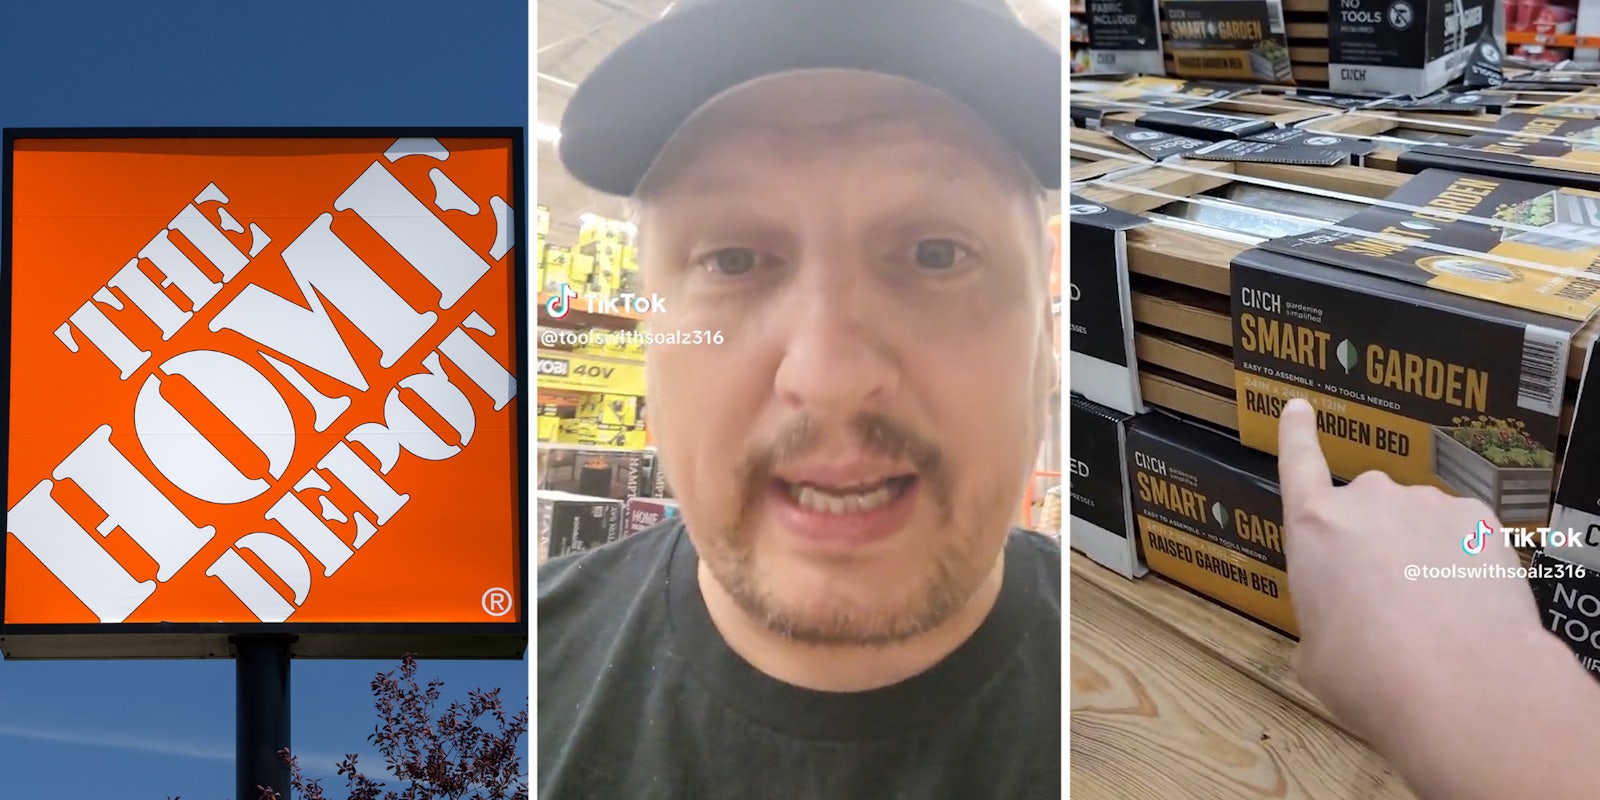 Home Depot sign(l), Man talking(c), Hand pointing to product(r)